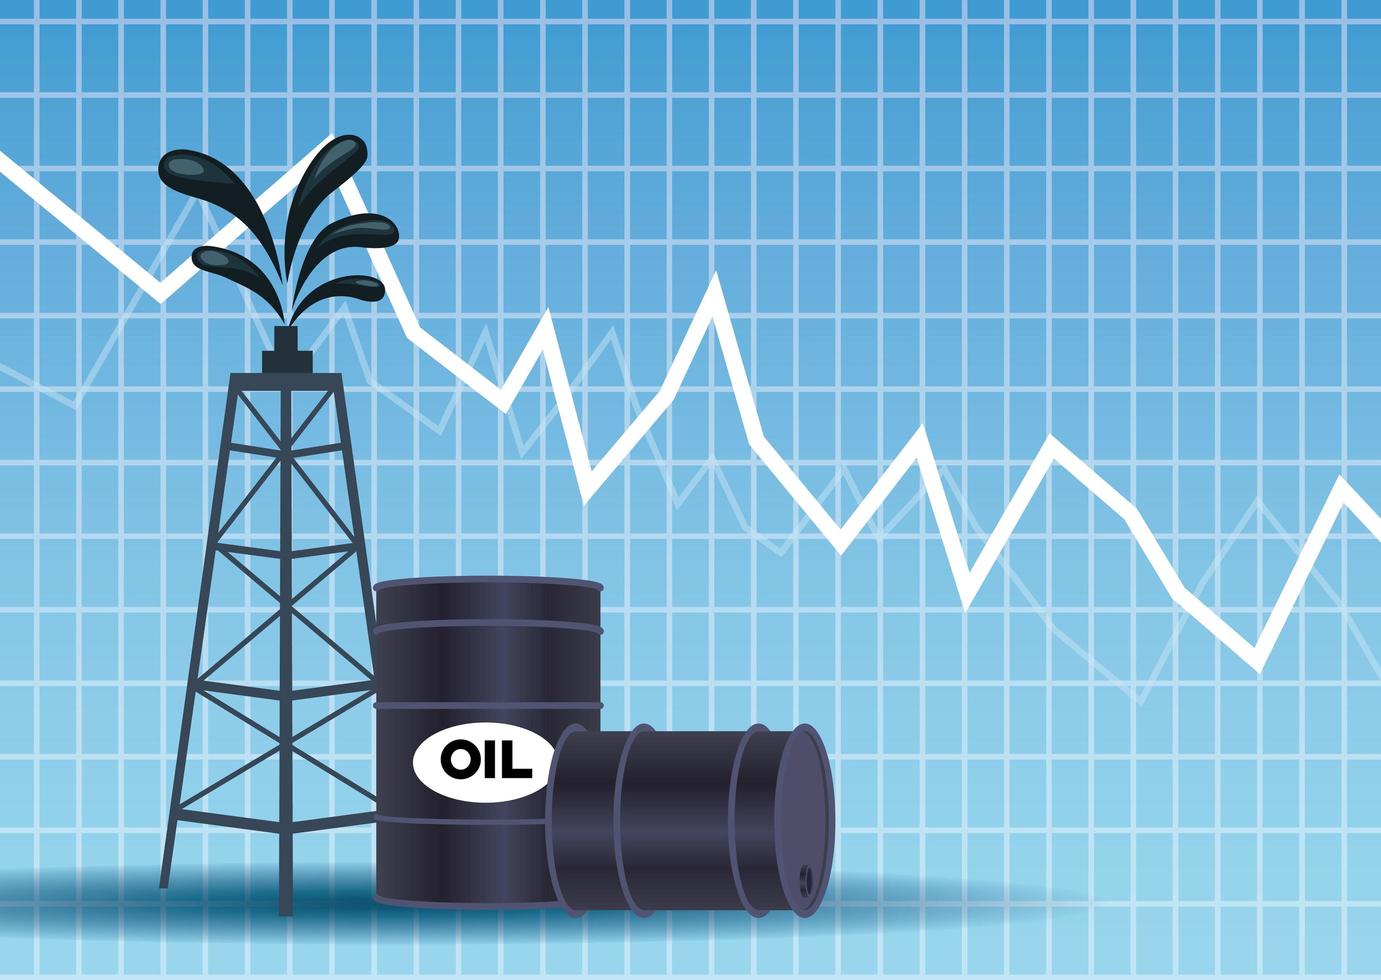 Oil price market with barrels and tower vector